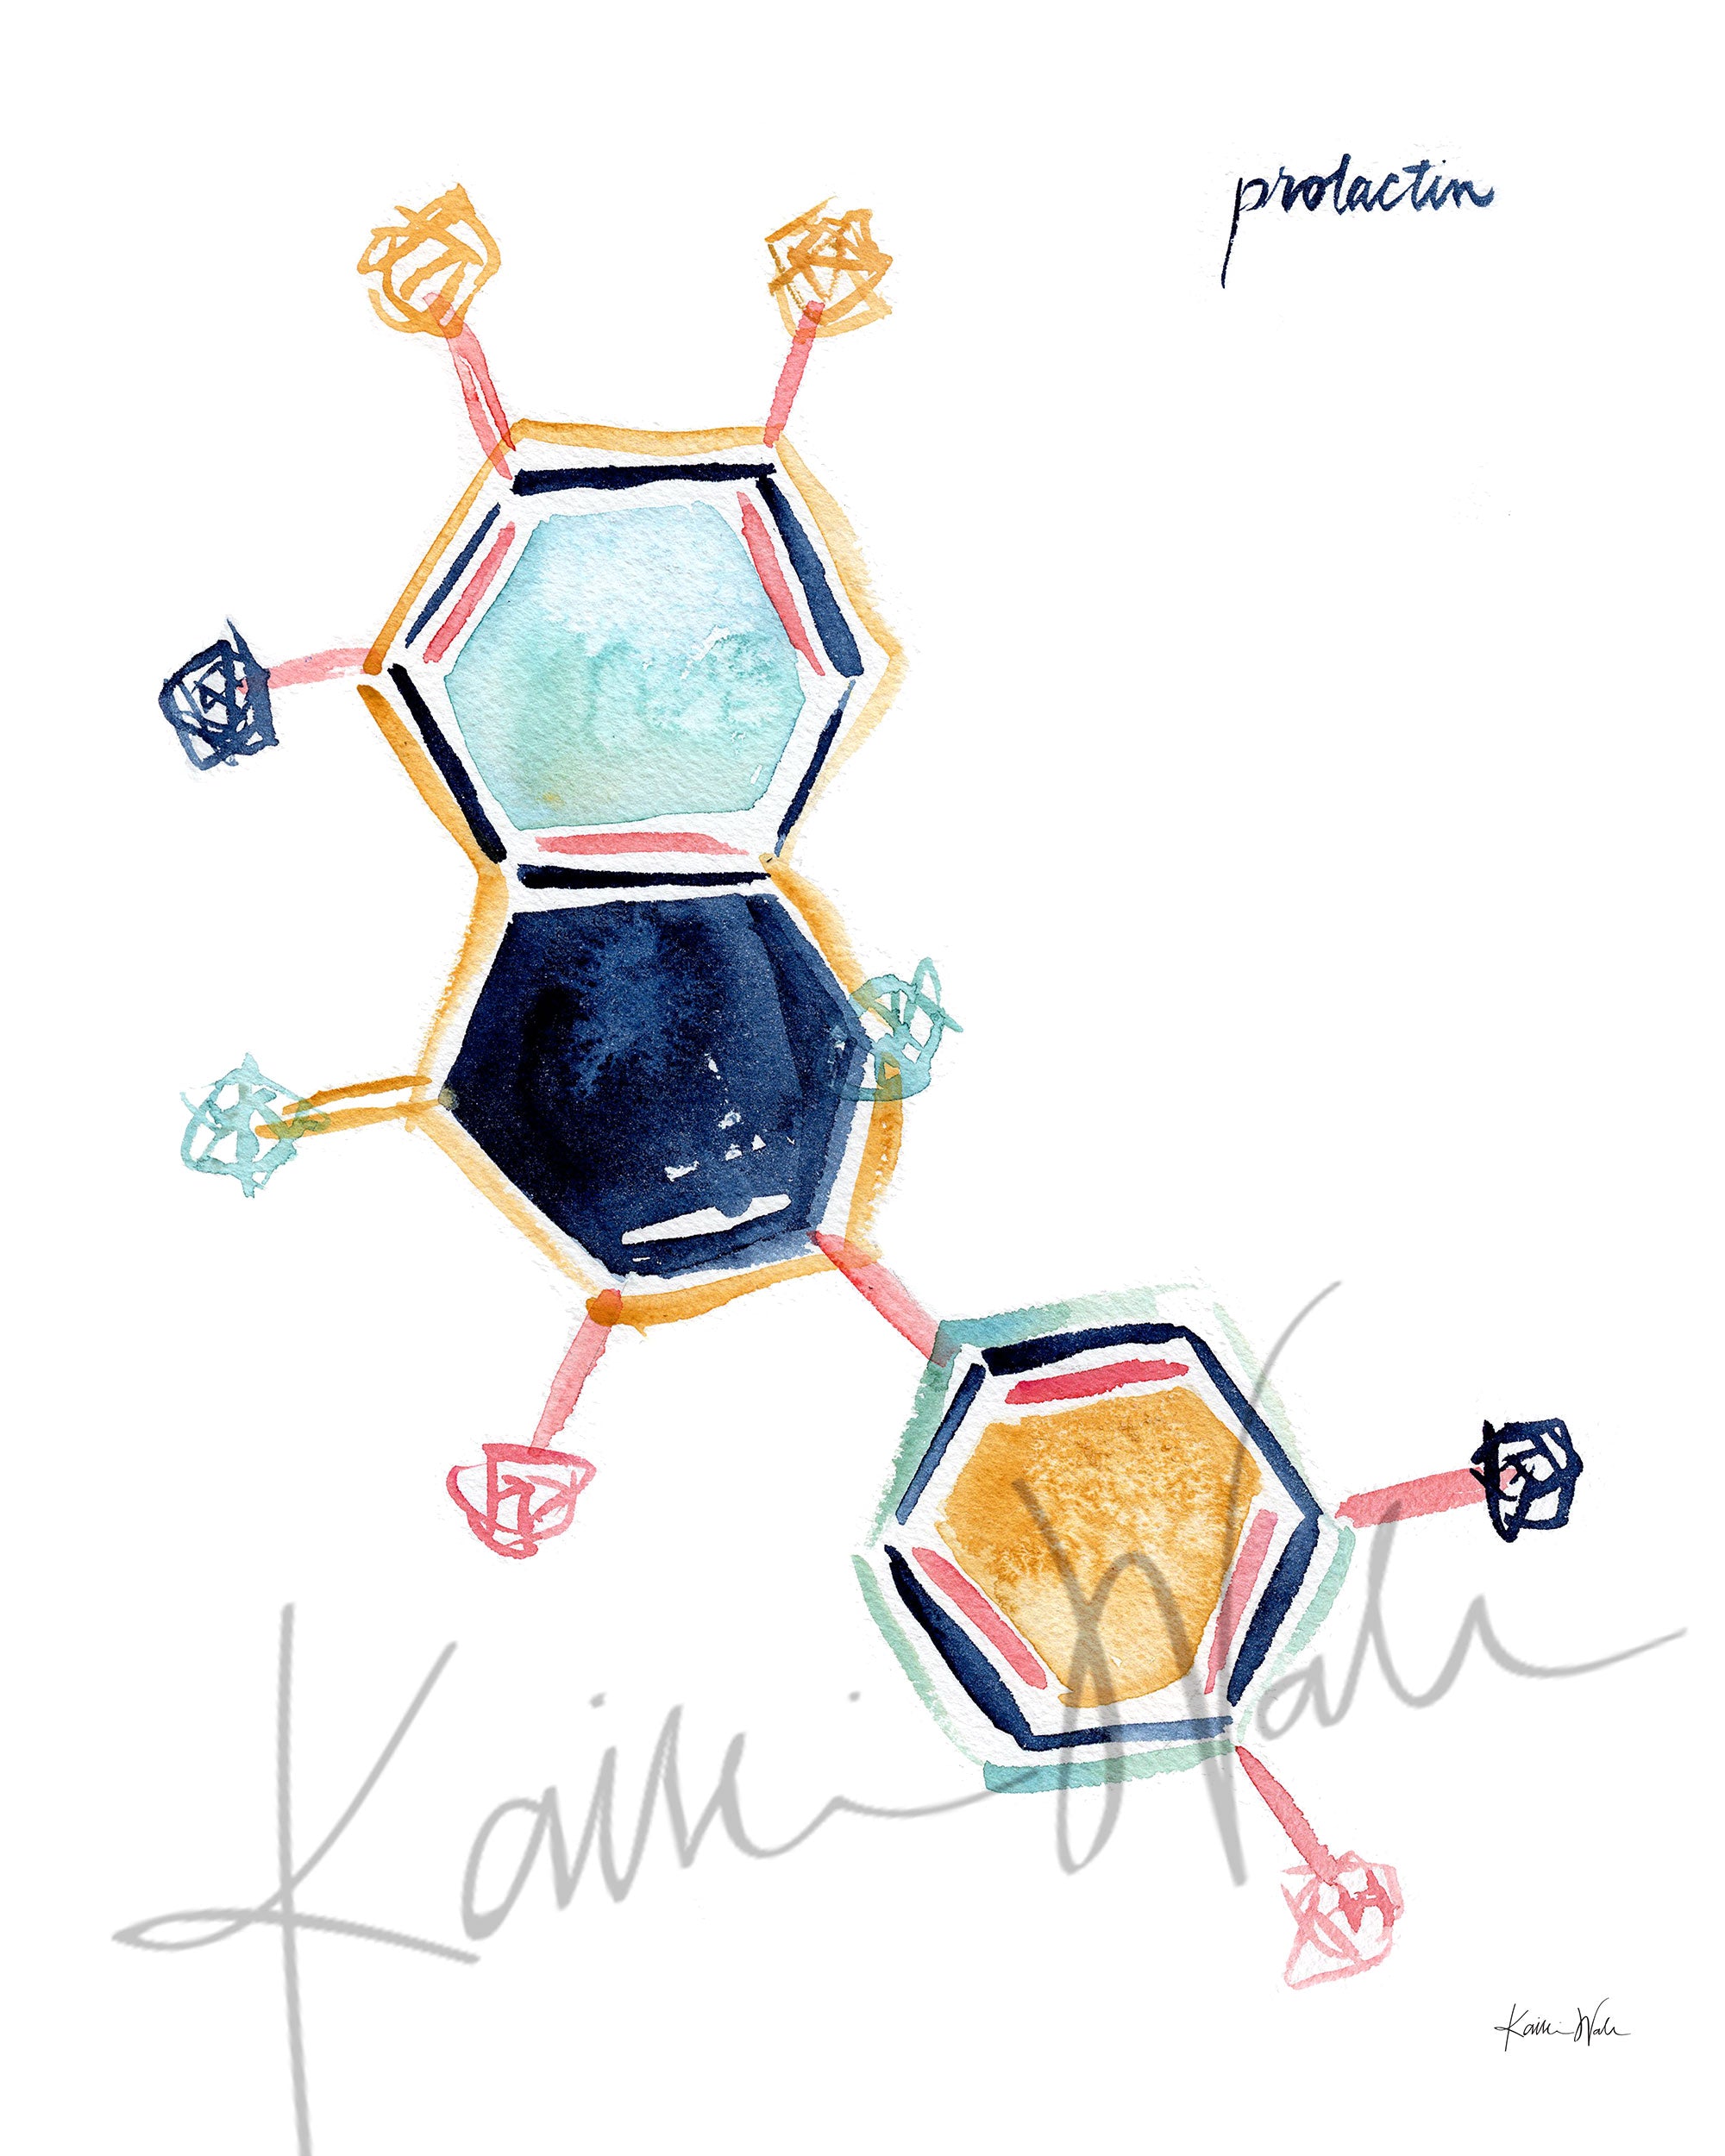 Unframed watercolor painting of prolactin hormone molecular structure.